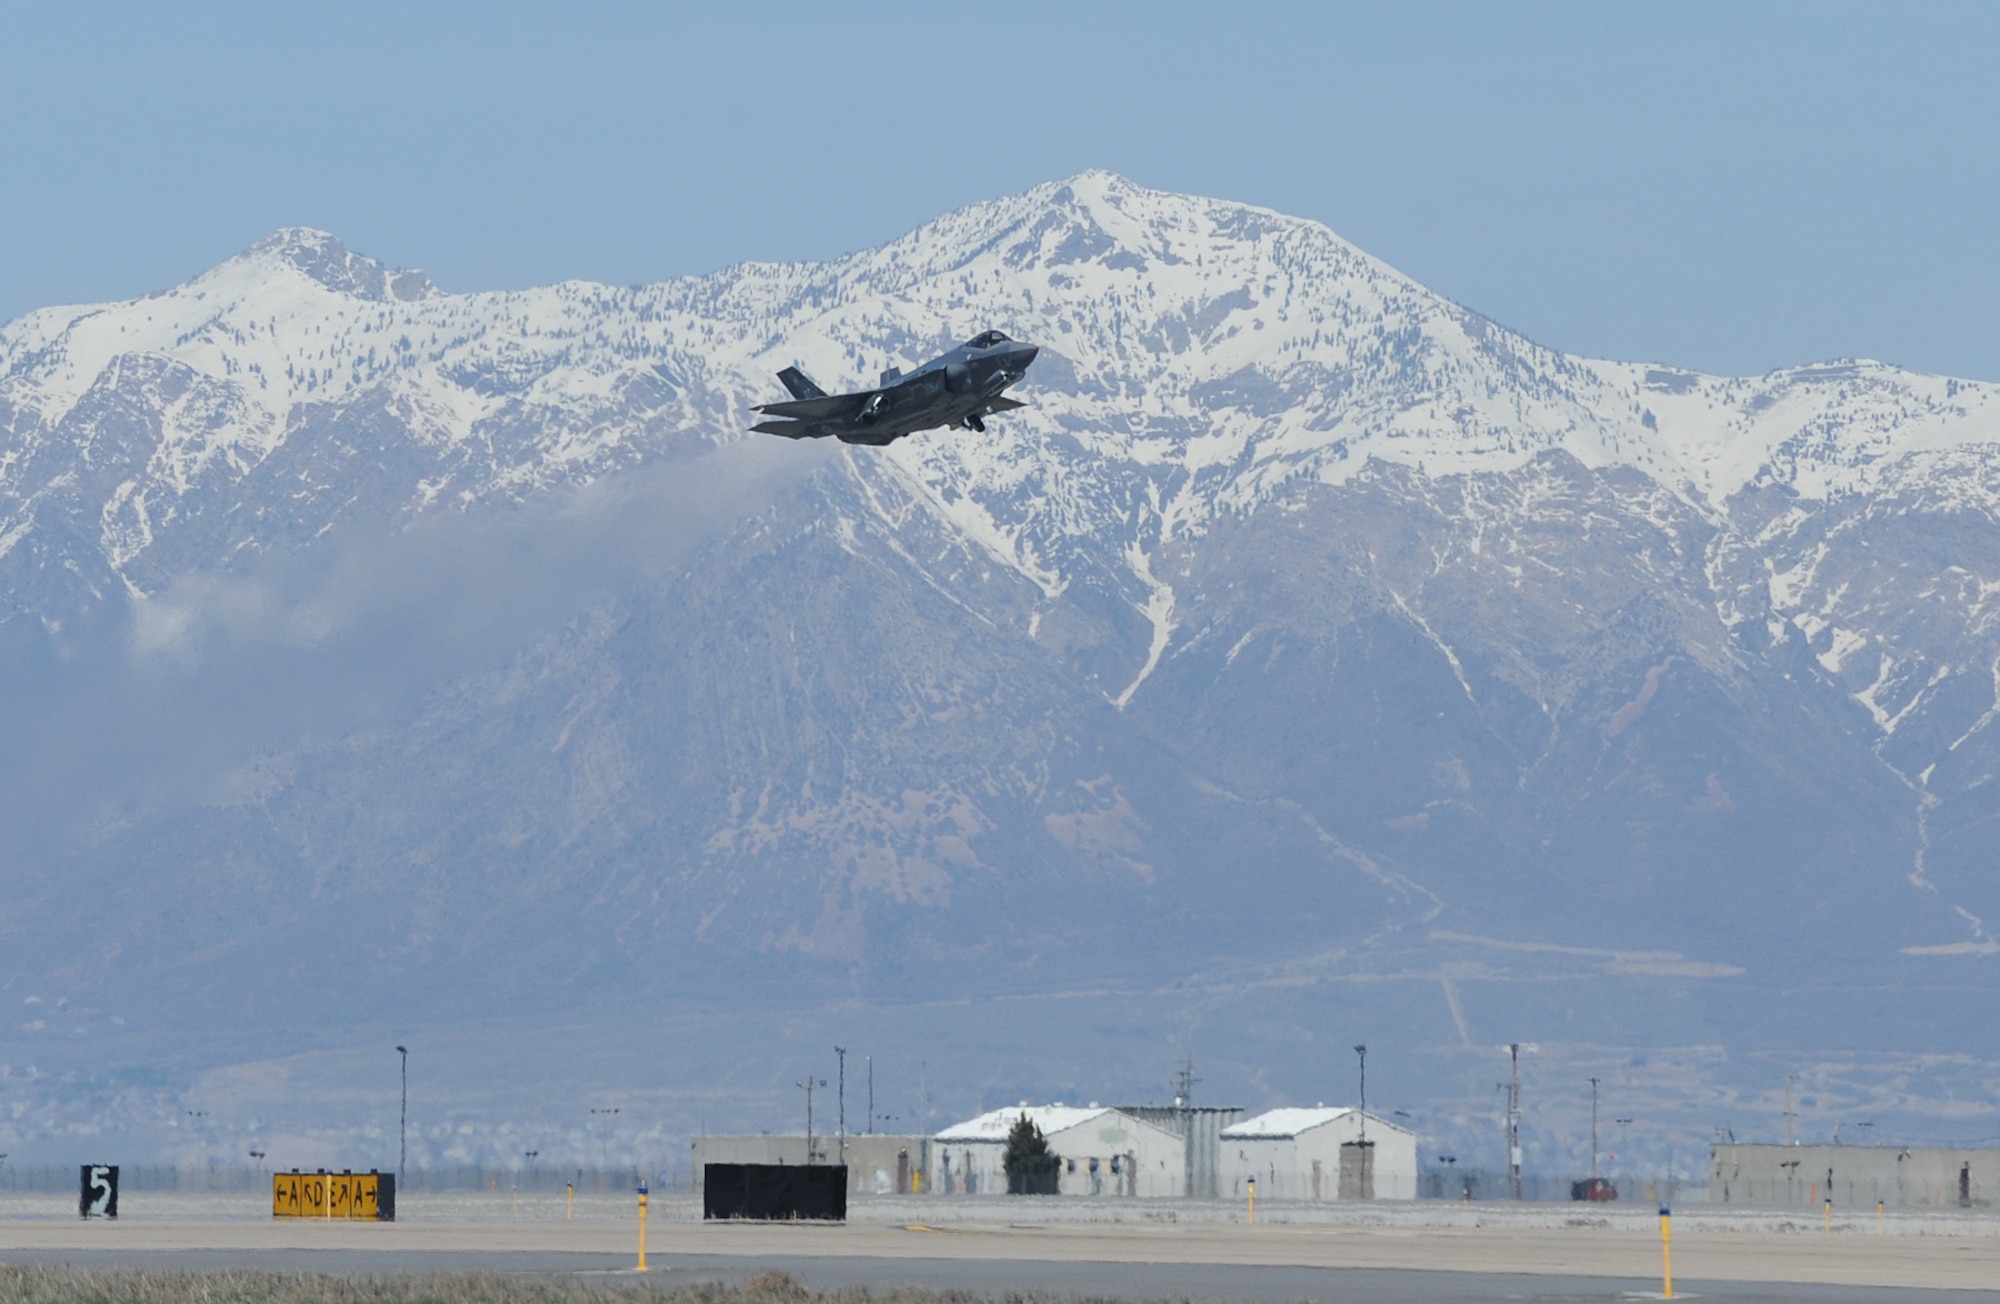 An F-35A Lightning II takes off March 25, 2014, from Hill Air Force Base, Utah en route to Nellis AFB, Nev. It was the first F-35 to receive organic modifications at the Ogden Air Logistics Complex at Hill AFB. The aircraft arrived at Hill AFB in September 2013 and received four structural modifications intended to strengthen areas of the aircraft and extends its service life. The Ogden ALC is expected to perform the series of modifications on a total of six F-35s during fiscal year 2014. Eight F-35s are expected to be inducted into the depot in fiscal year 2015. (U.S. Air Force photo/Alex R. Lloyd)